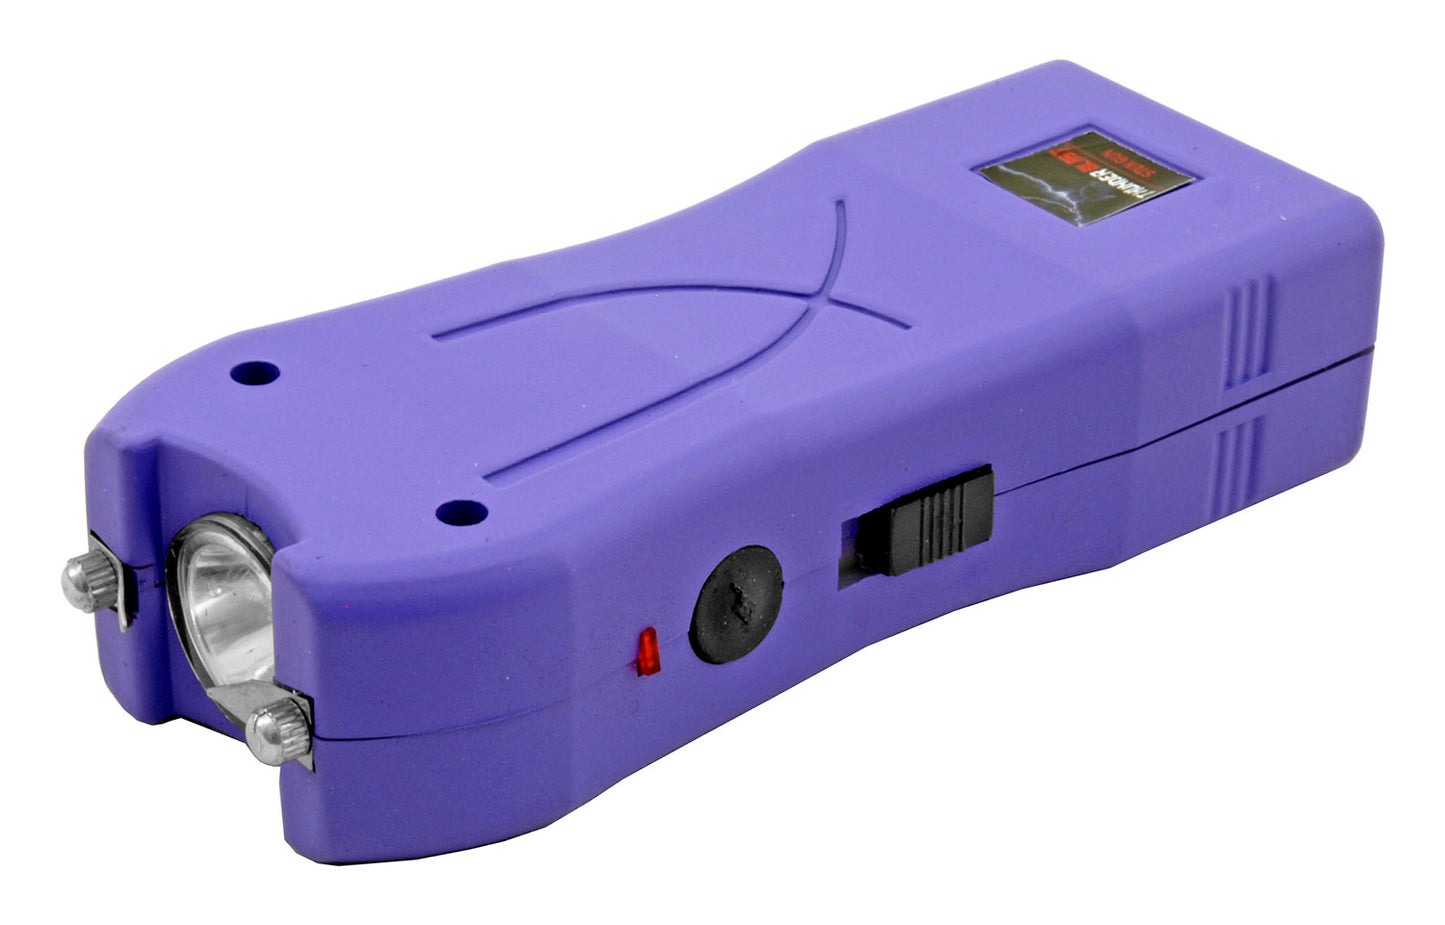 HIgh Voltage Compact Rechargeable Stun Gun with Flashlight (multiple colors)